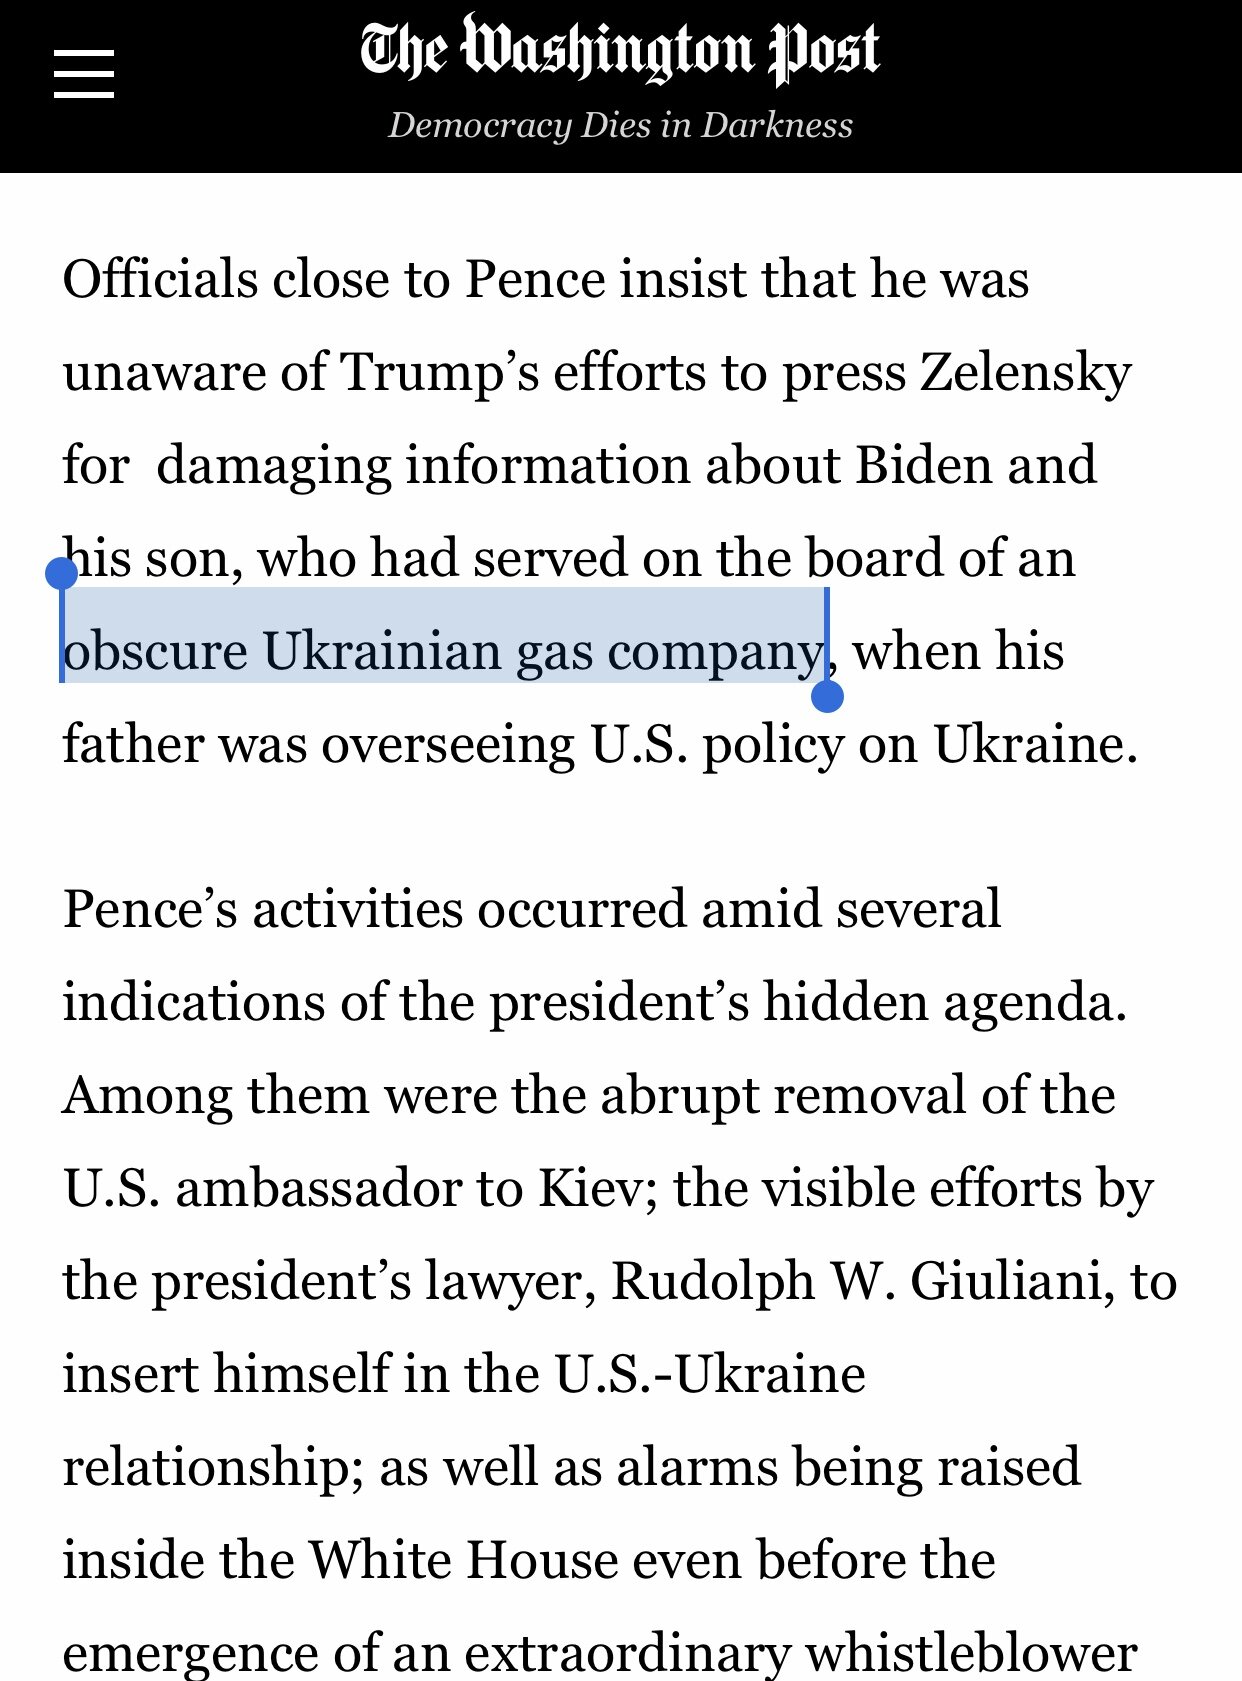 WaPo Article 'A' - 'OBSCURE'